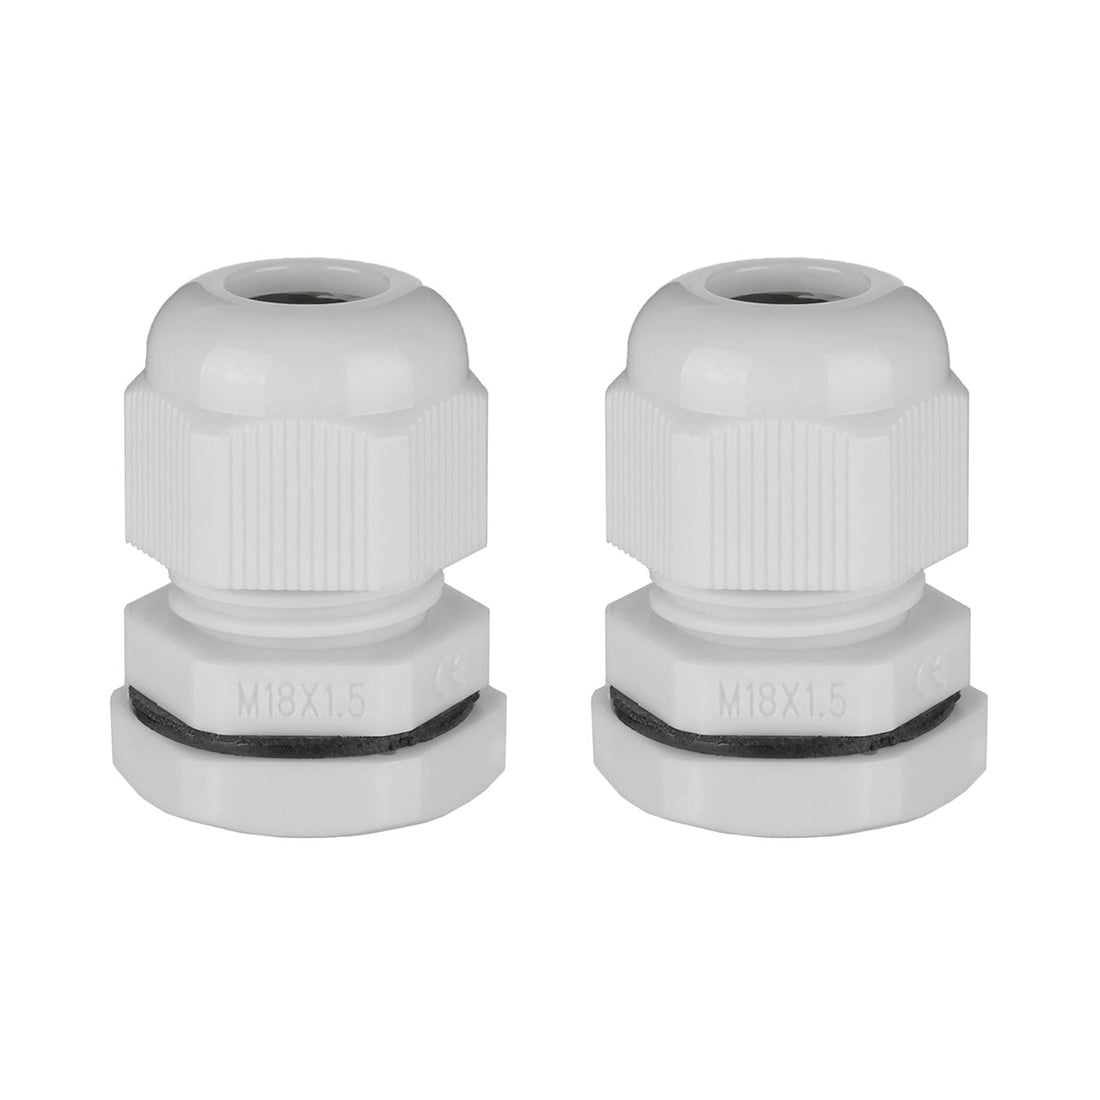 uxcell Uxcell M18 Cable Gland Waterproof Plastic Joint Adjustable Locknut White for 5mm-10mm Dia Cable Wire 2 Pcs